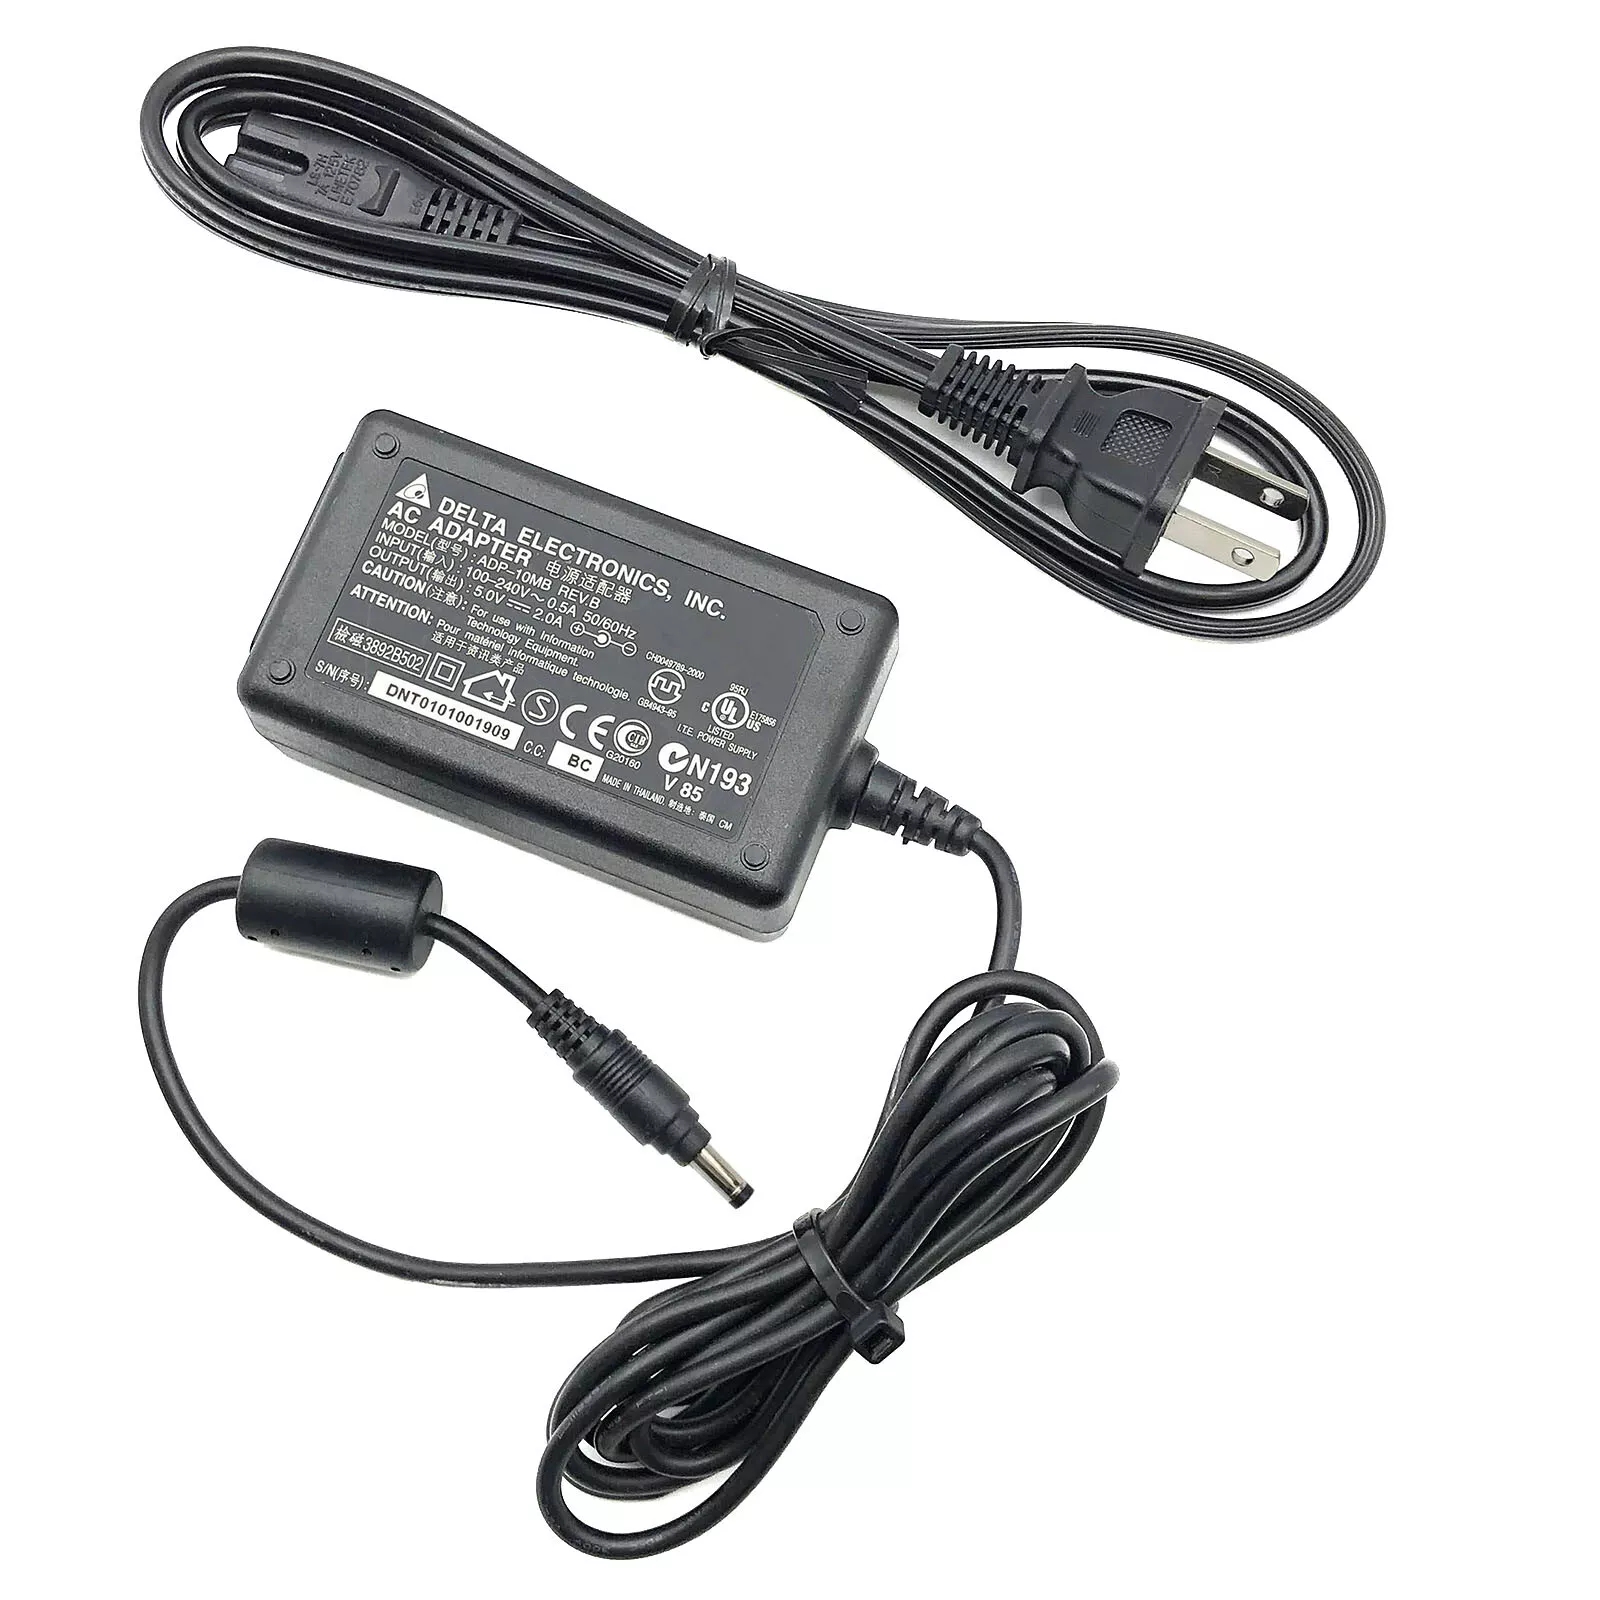 *Brand NEW*Genuine Delta ADP-10MB 5V 2A 10W AC Adapter Power Supply